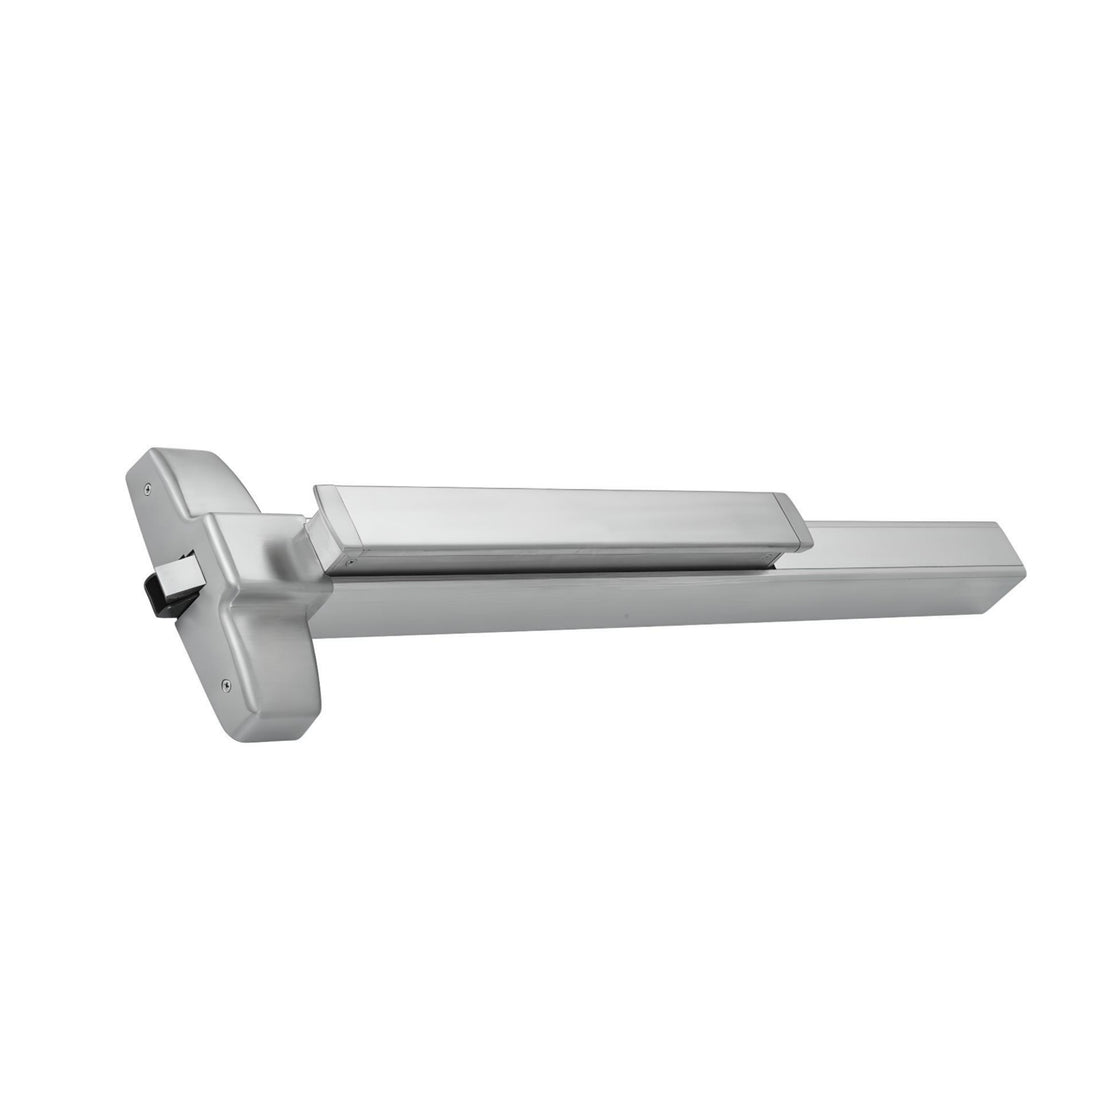 900 Series UL Listed Aluminum 36 in Grade 1 Heavy Duty Panic Rim Surface Exit Device -  Pro-Edge HD